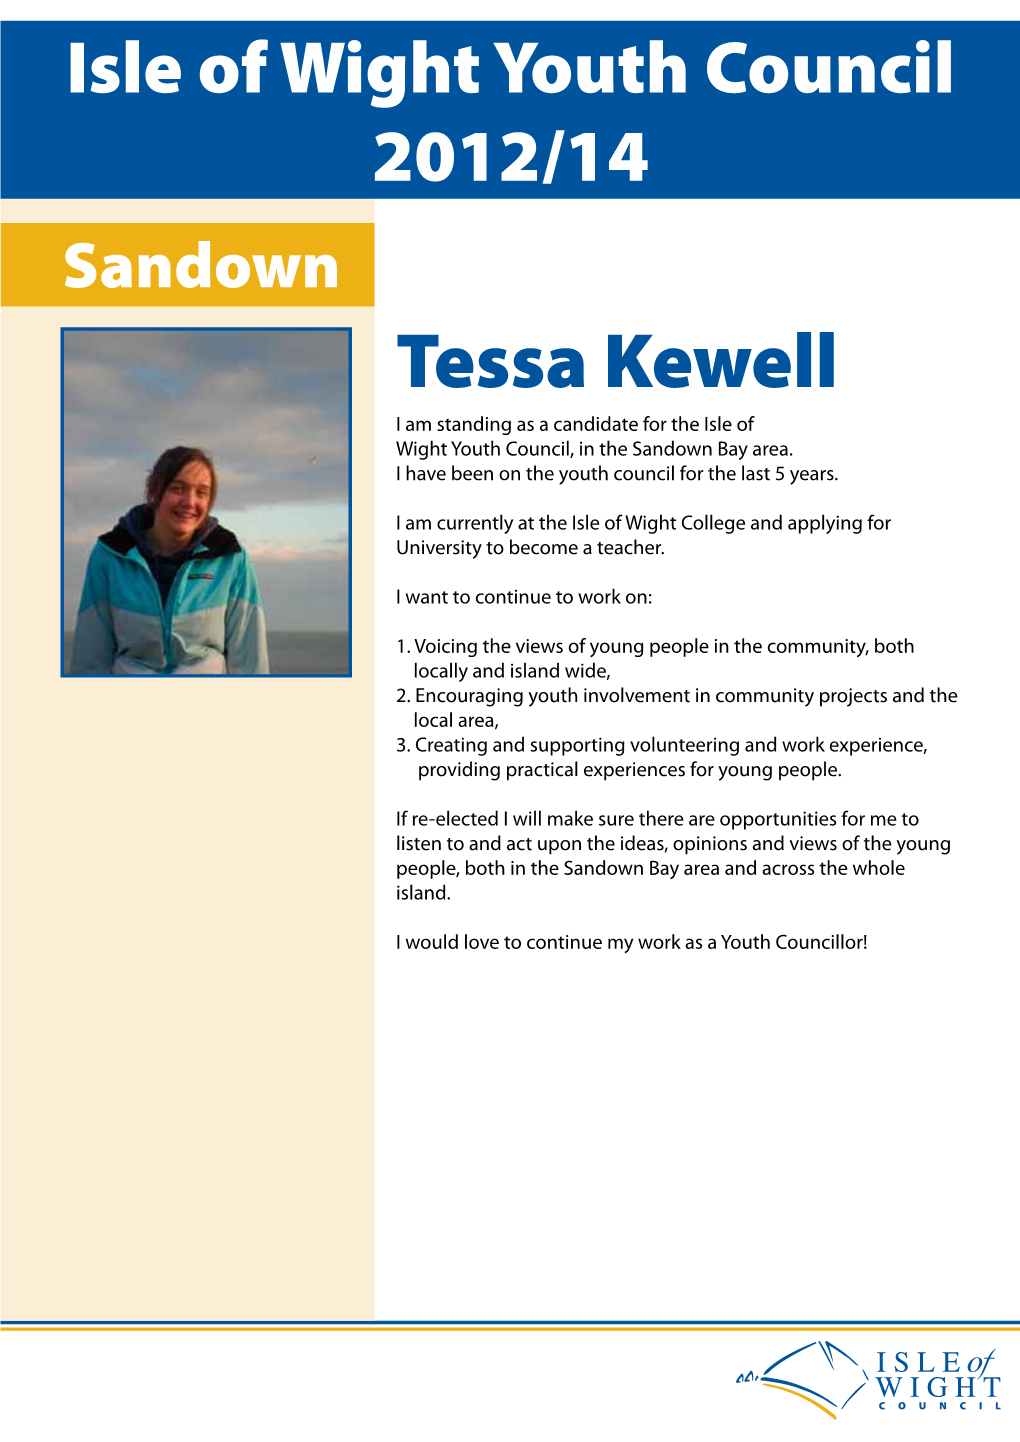 Isle of Wight Youth Council 2012/14 Sandown Tessa Kewell I Am Standing As a Candidate for the Isle of Wight Youth Council, in the Sandown Bay Area